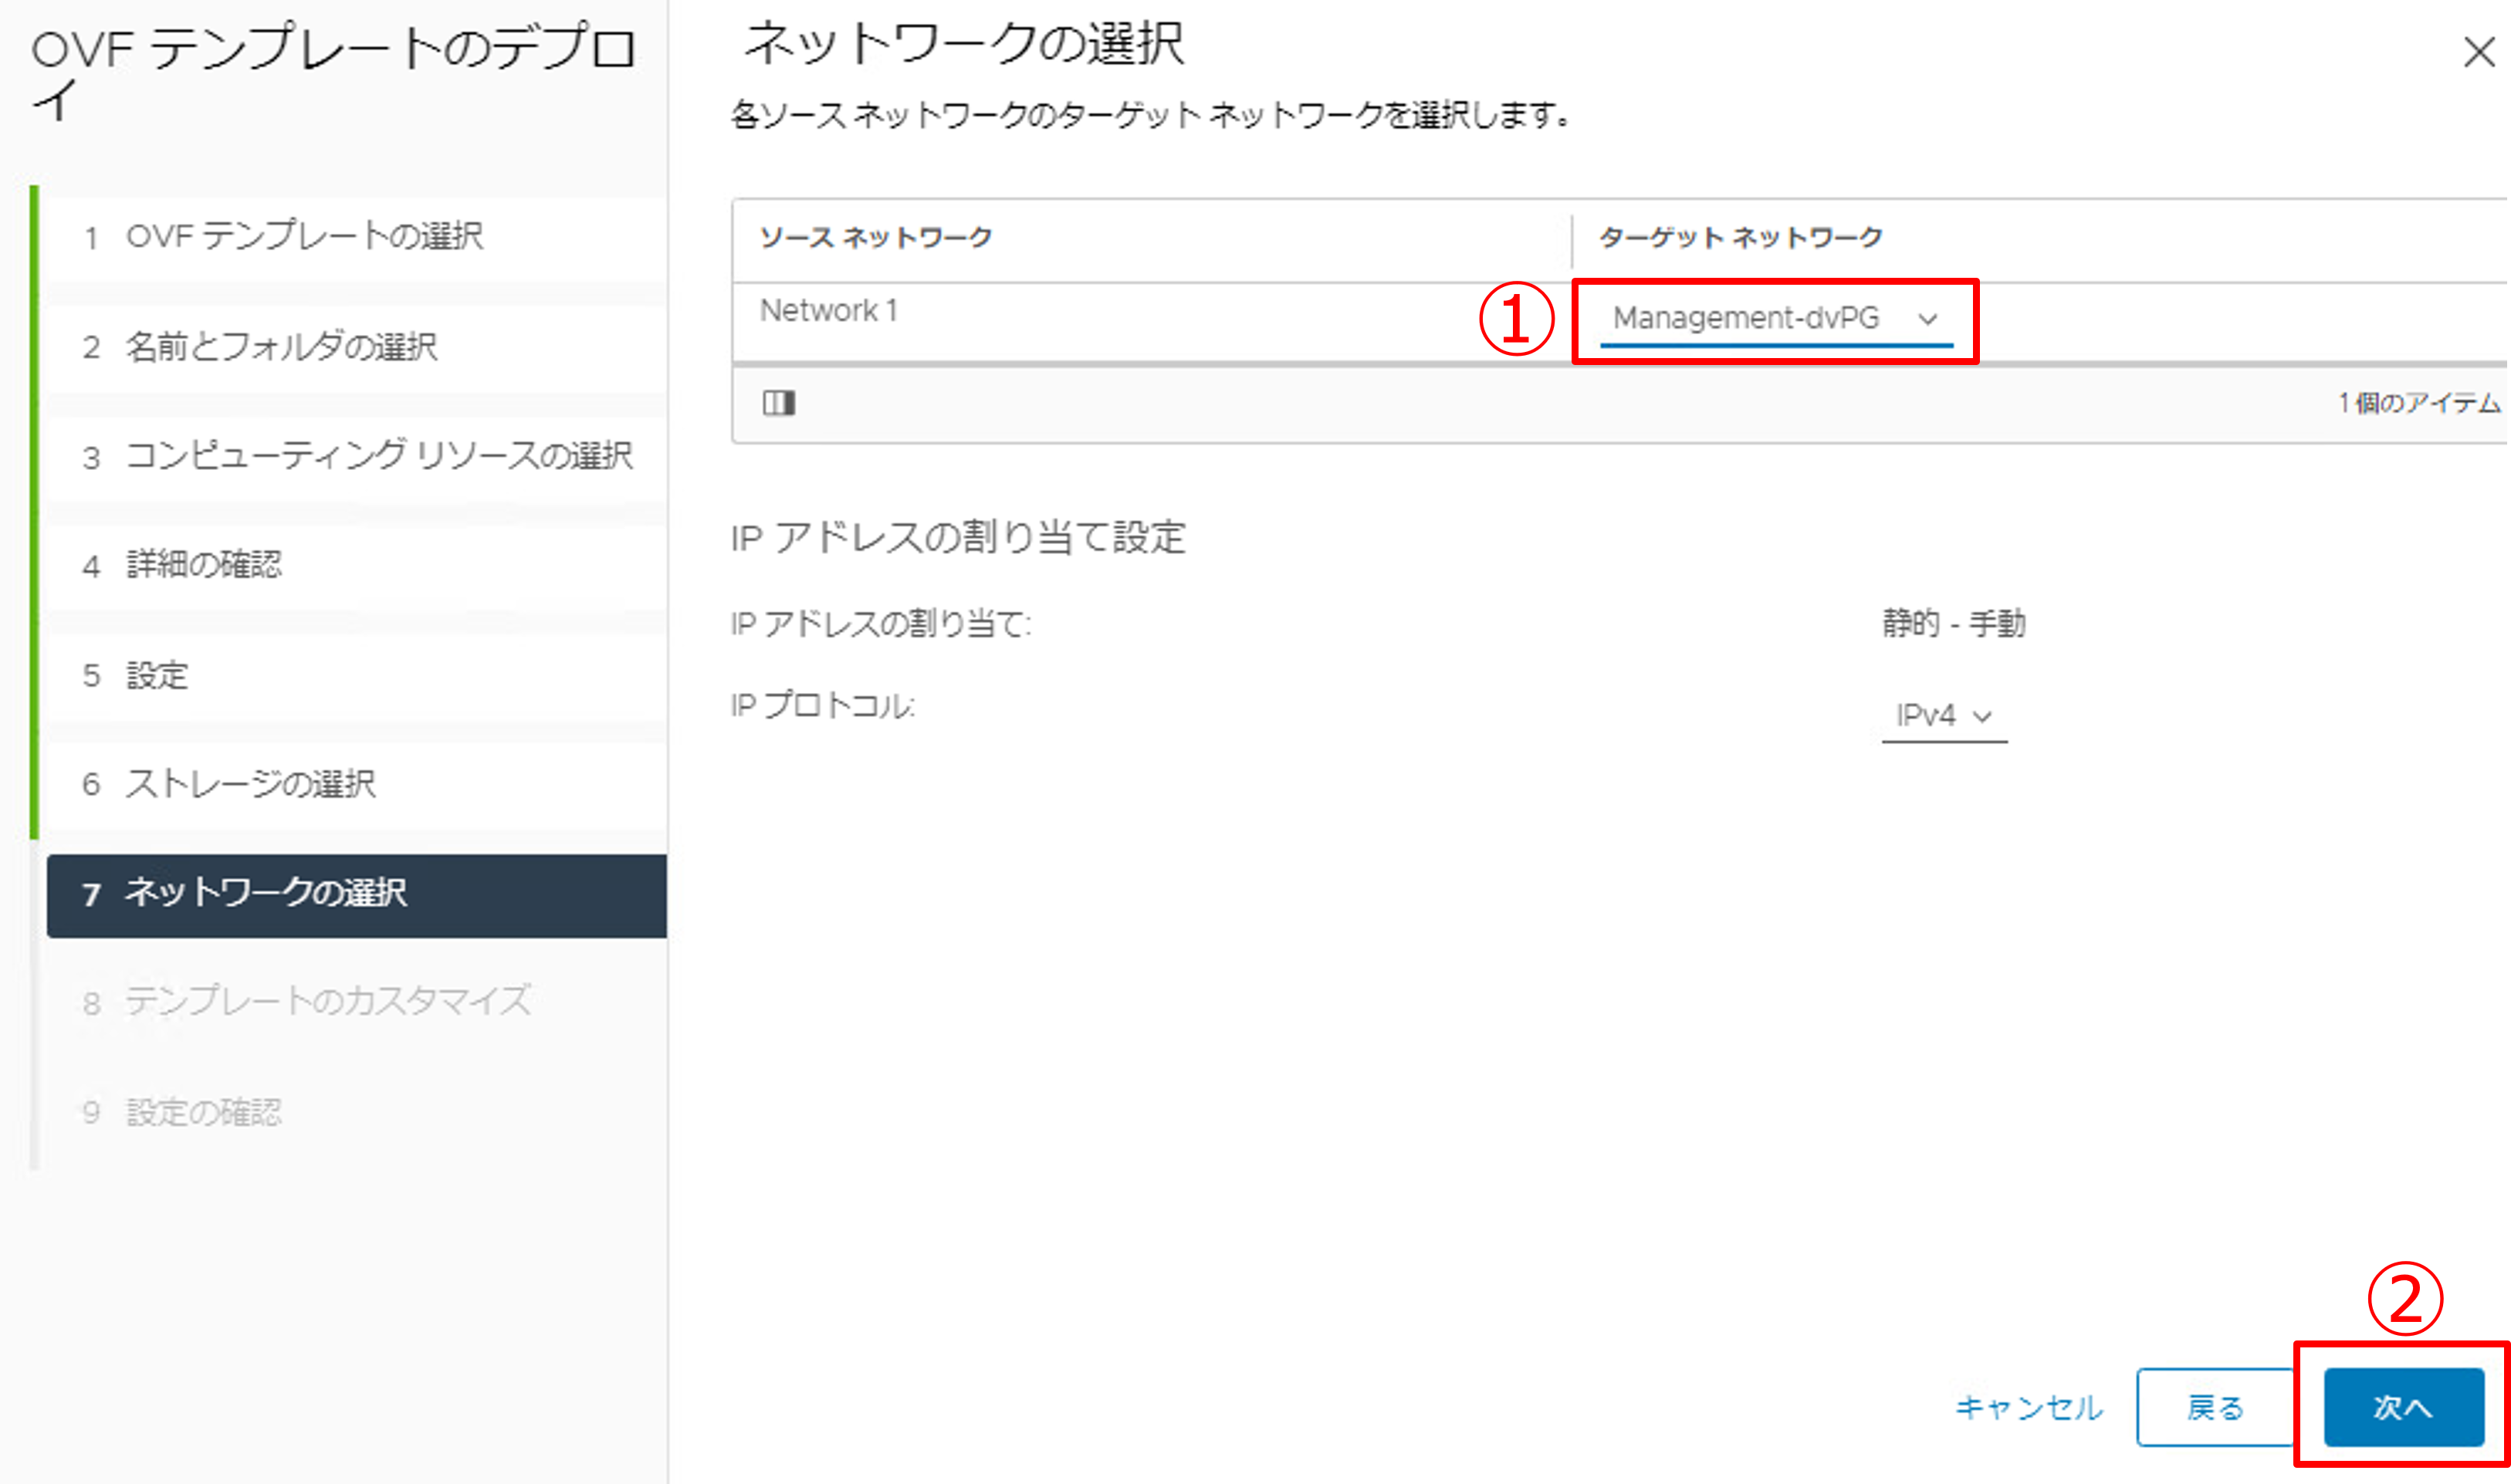 NSX Managerのデプロイ-10.png